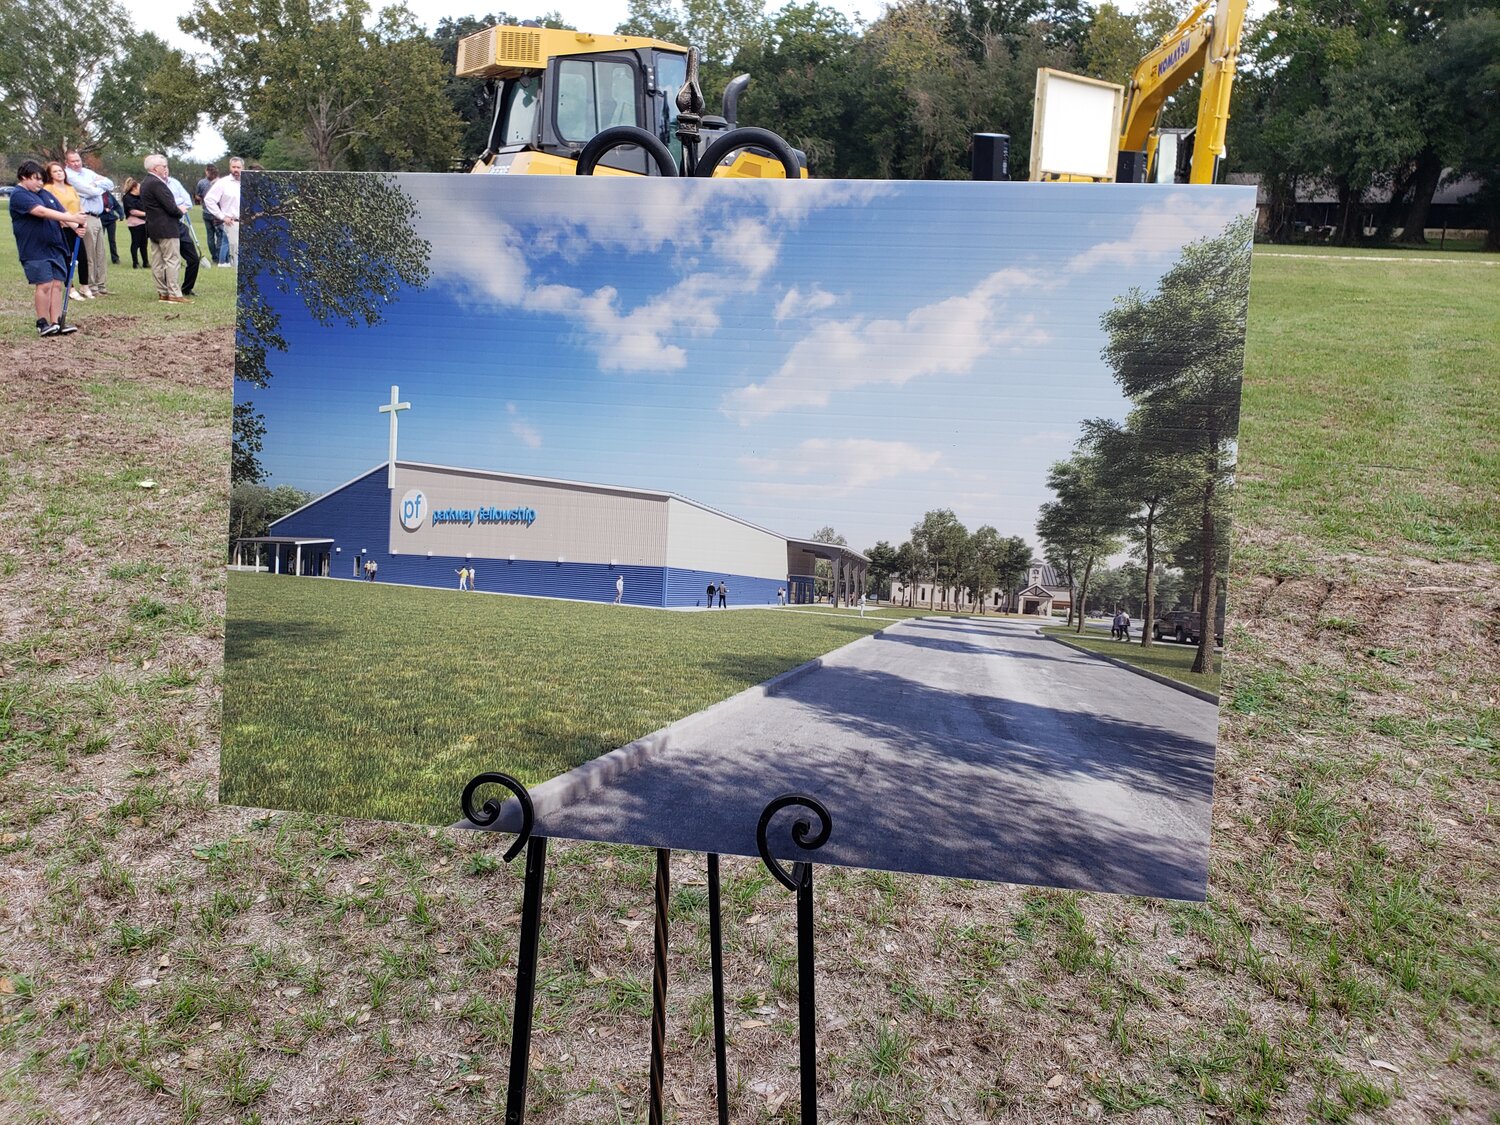 A rendering of the new facility was featured at the ceremony.